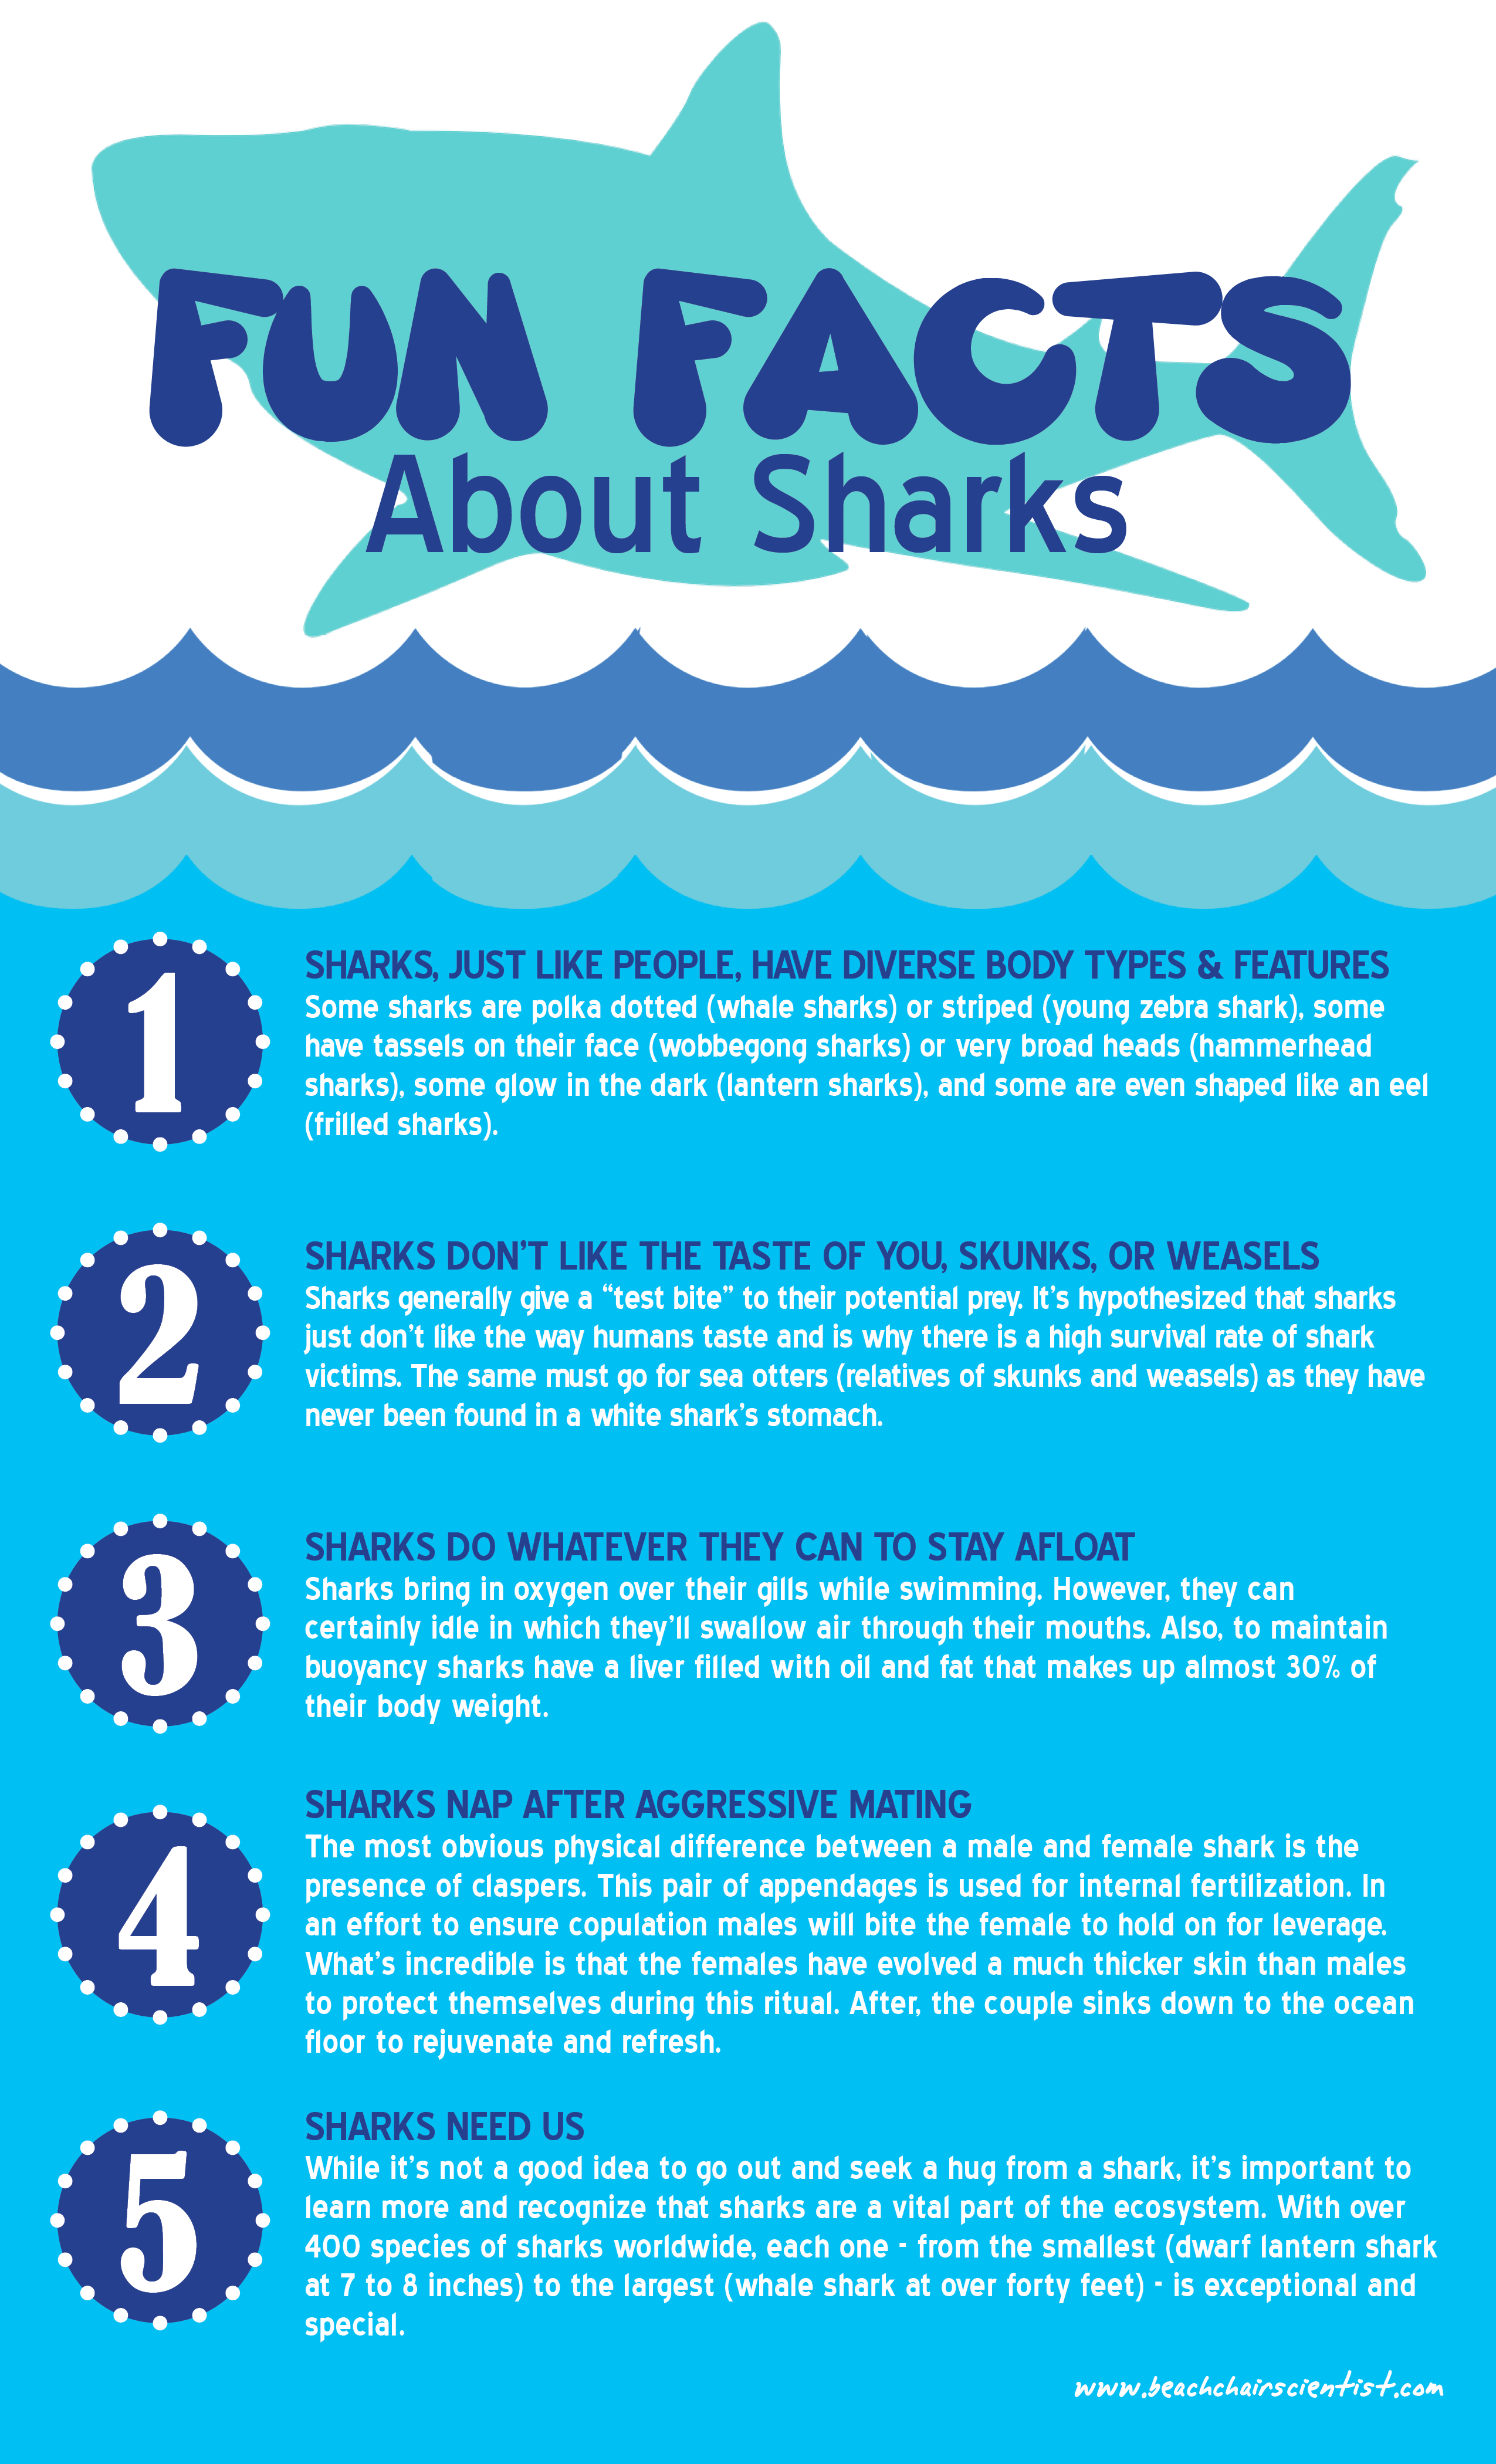 Five surprising facts about sharks